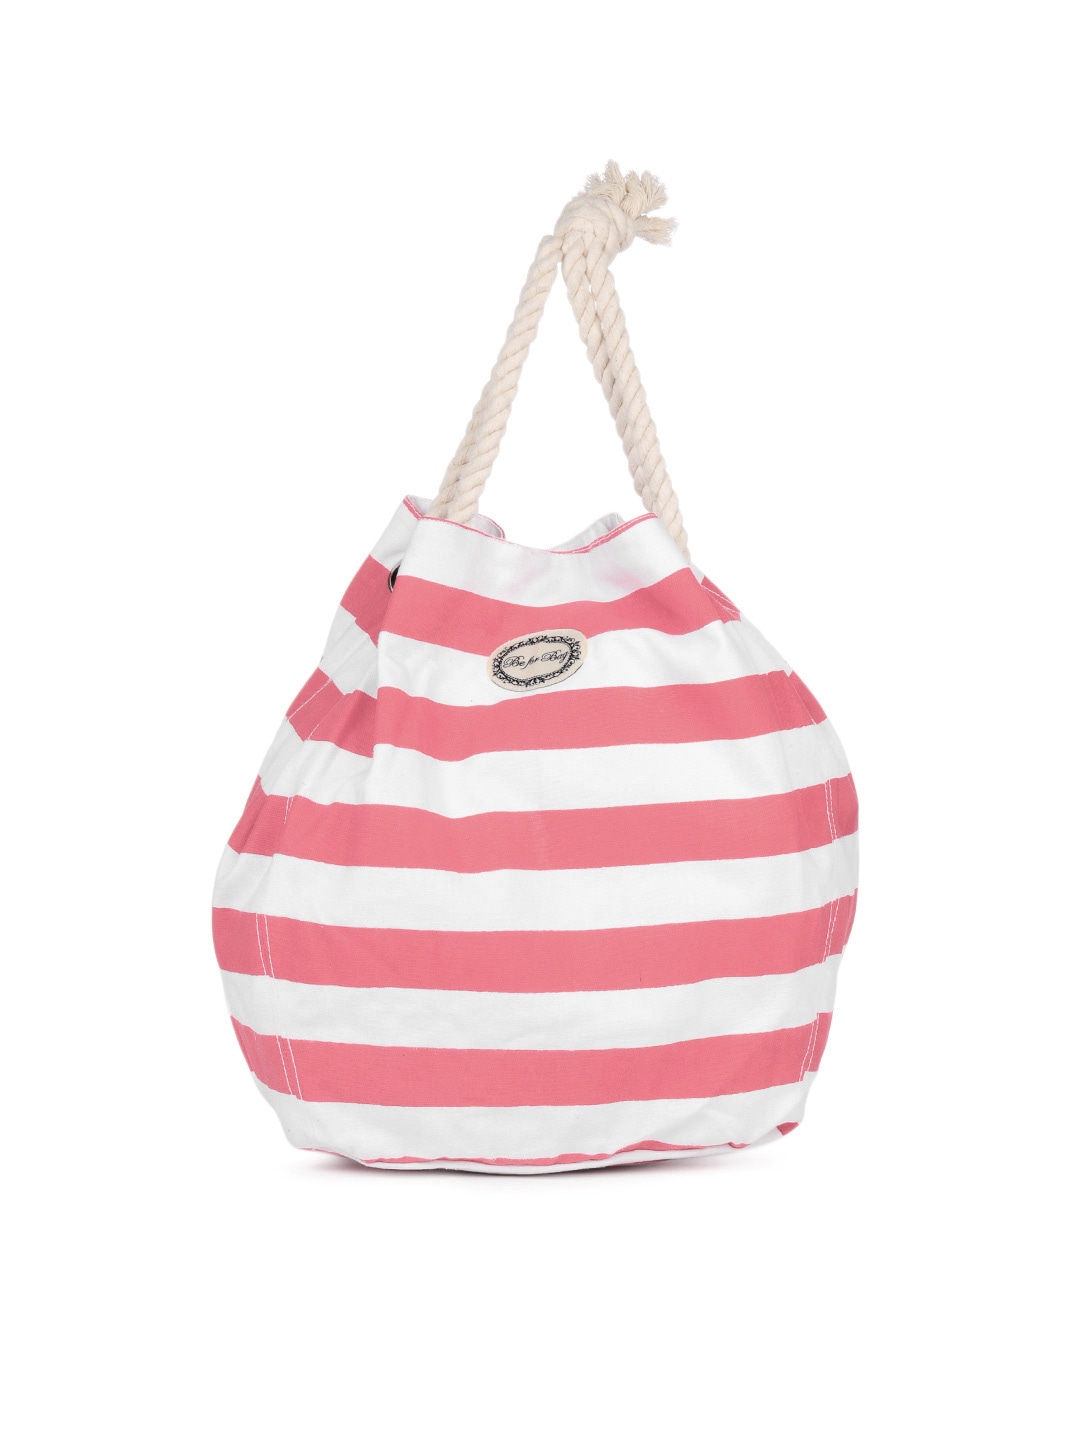 Be For Bag Women White And Pink Striped Tote Bag